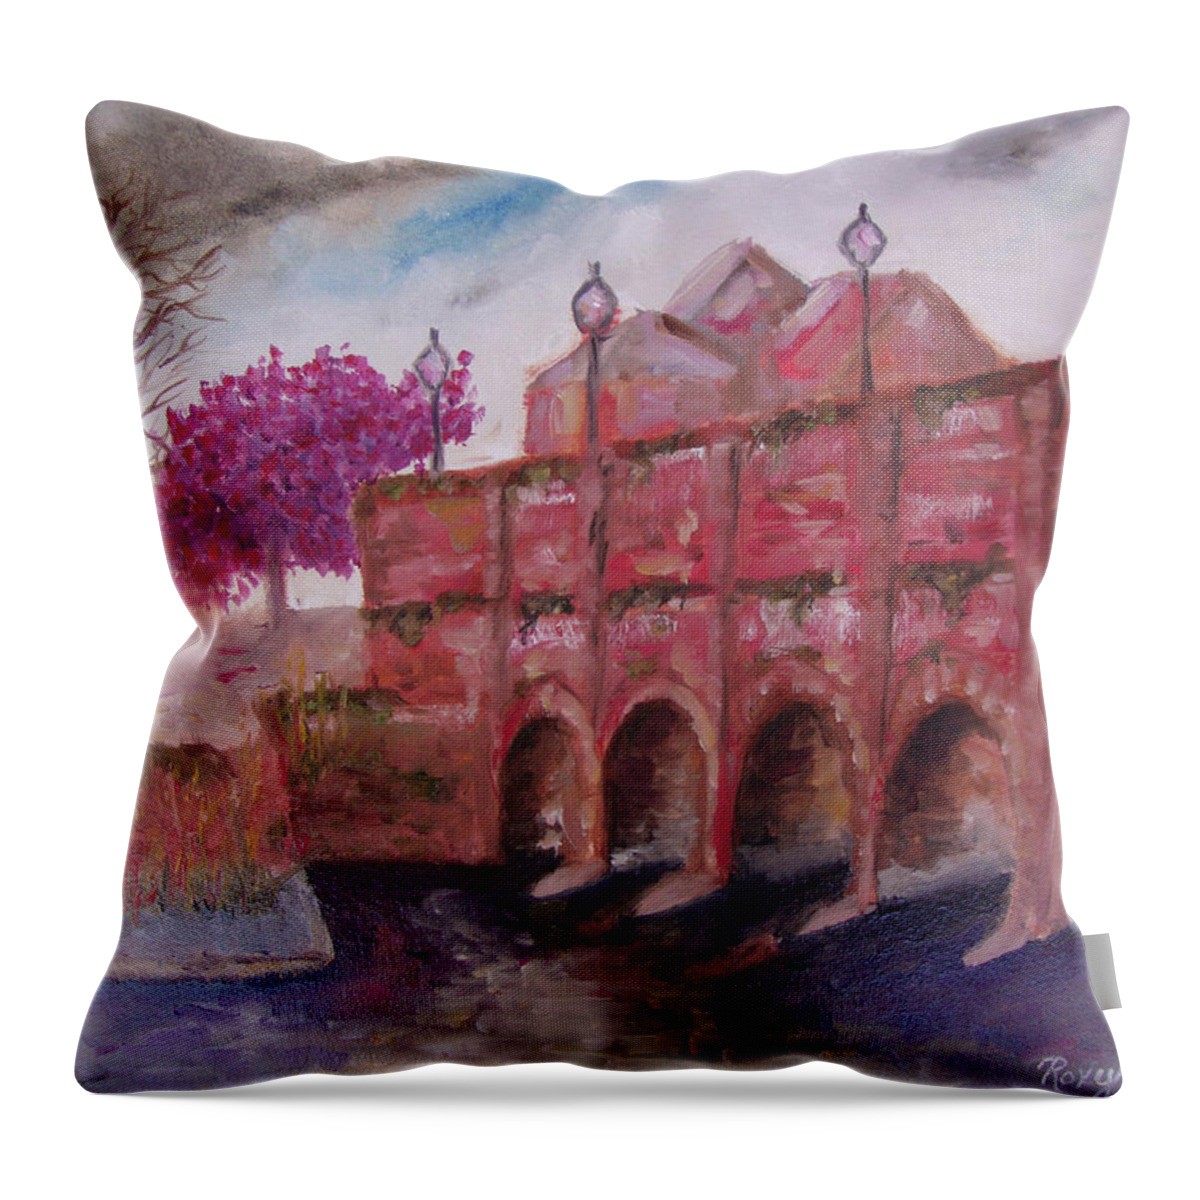 Stratford Upon Avon Throw Pillow featuring the painting Stratford upon Avon by Roxy Rich